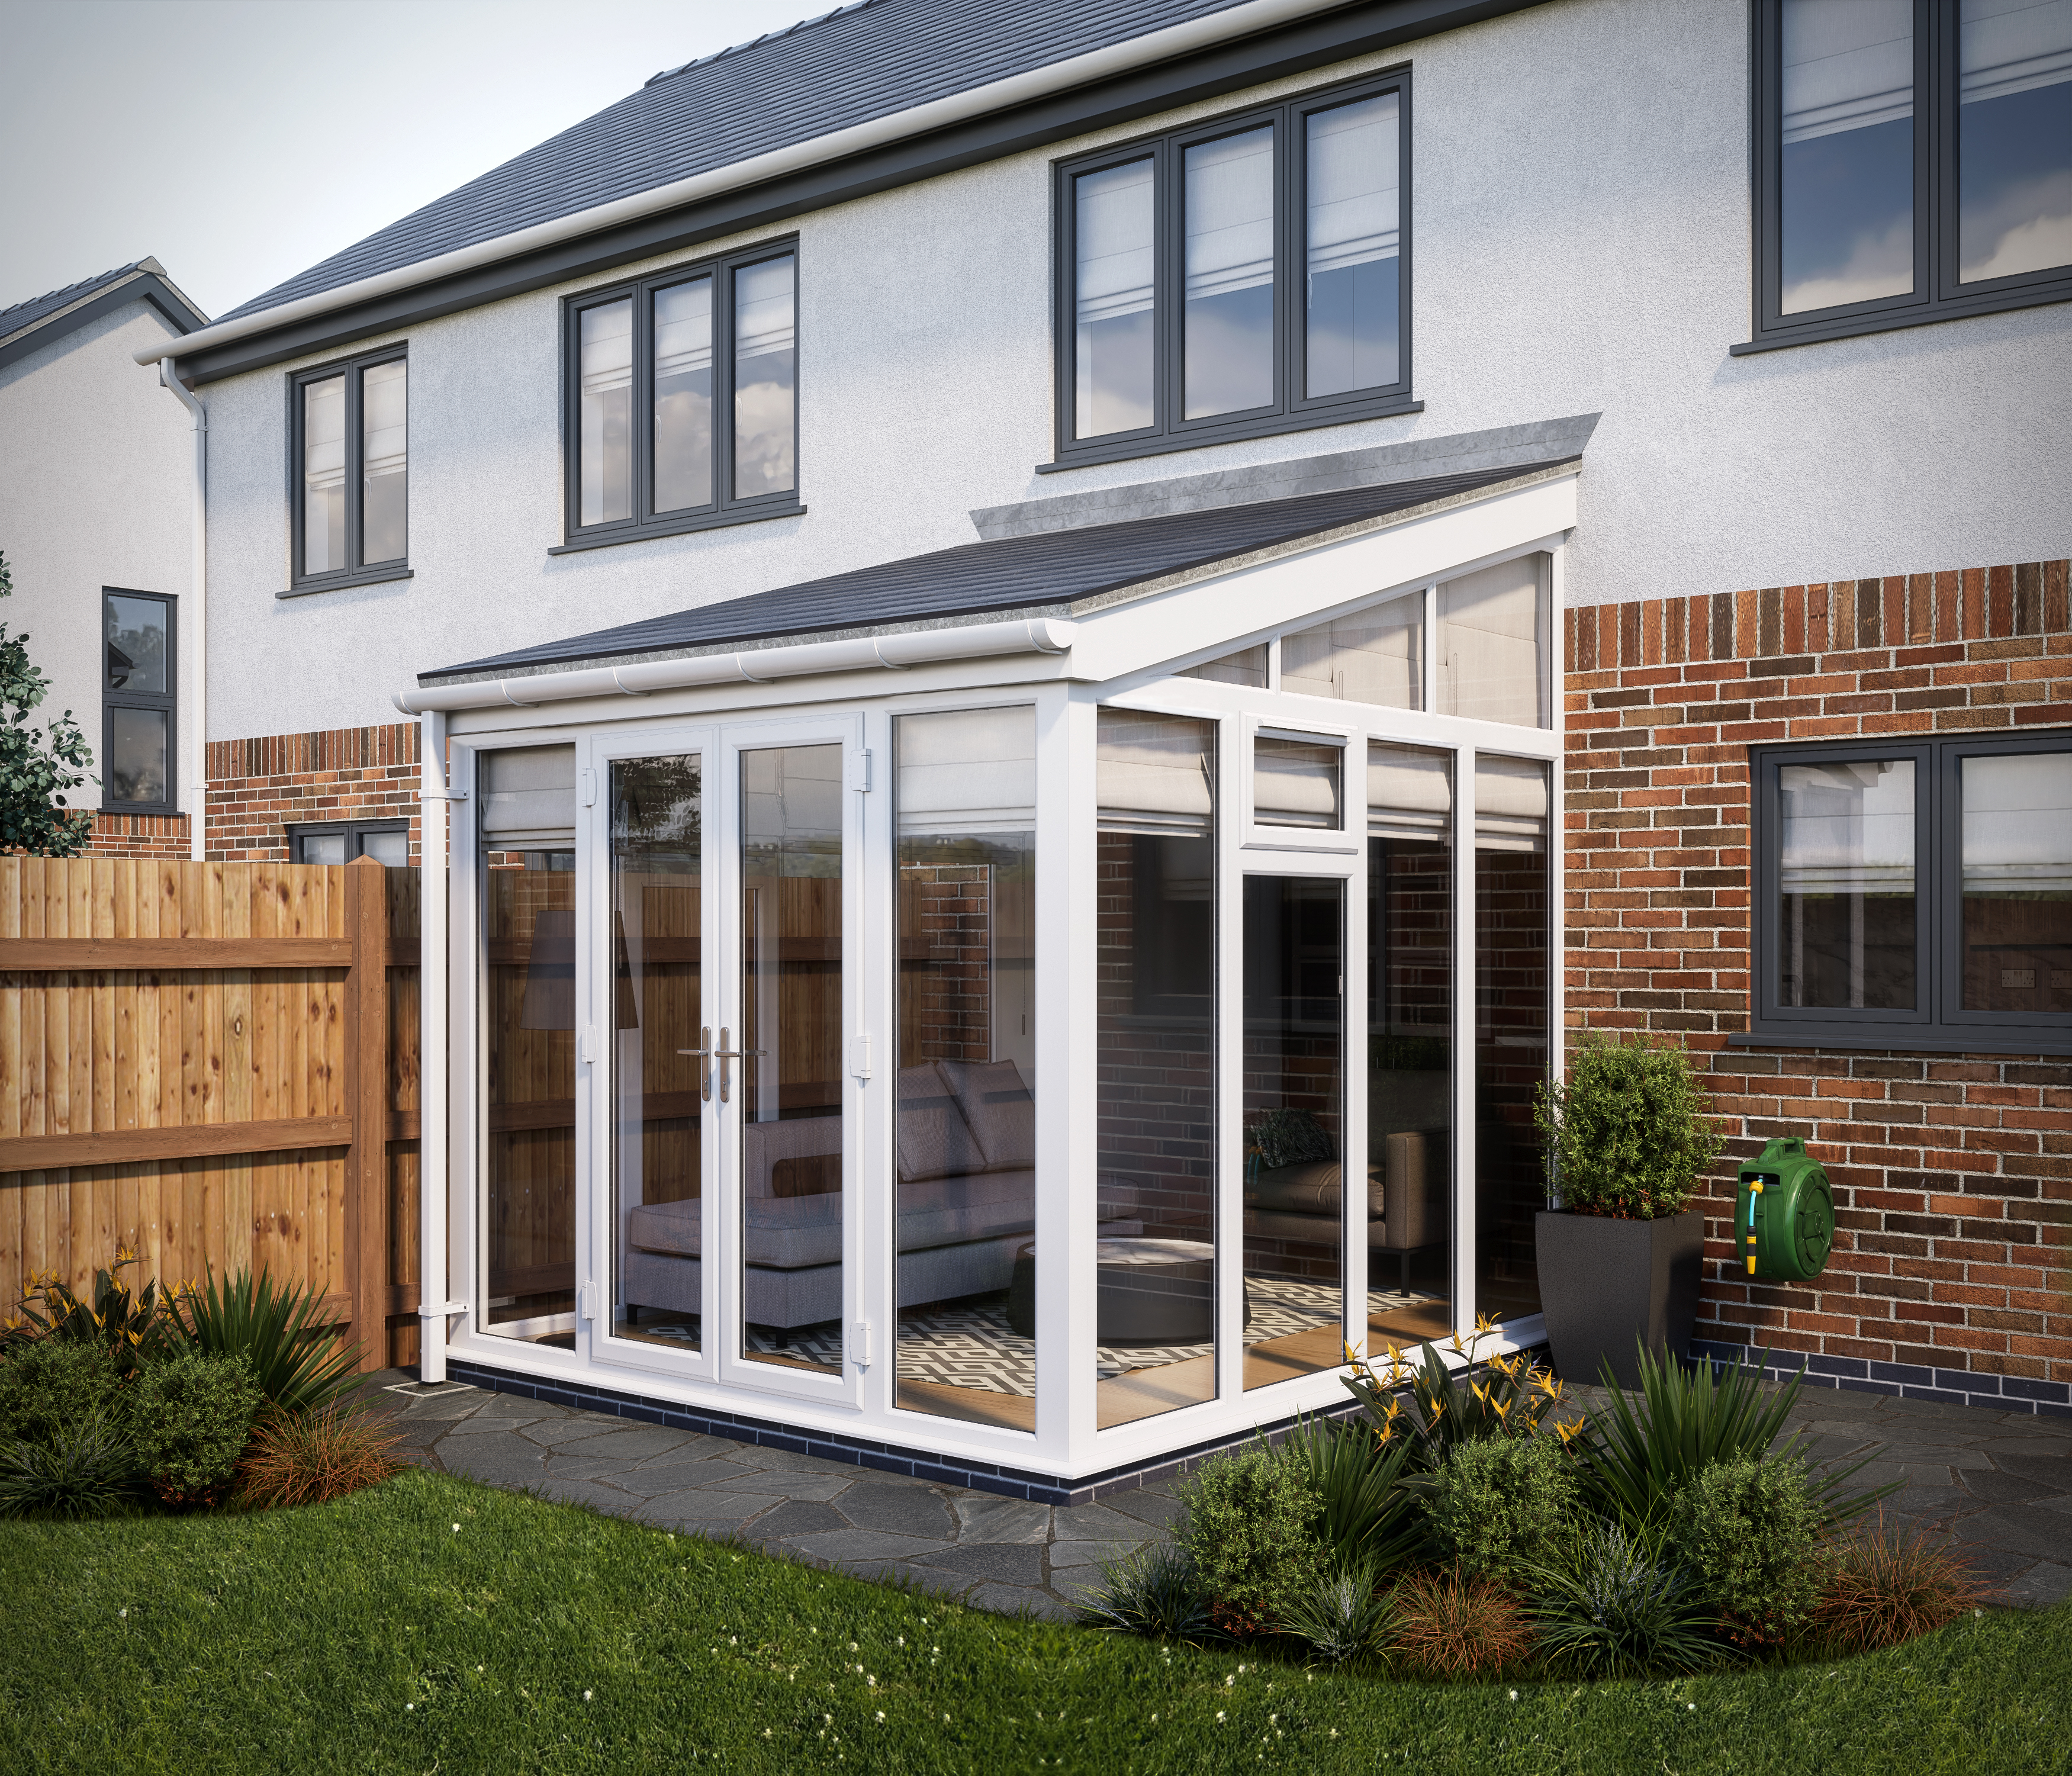 Image of SOLid Roof Full Height Lean to Conservatory White Frames with Titanium Grey Tiles - 13 x 10ft